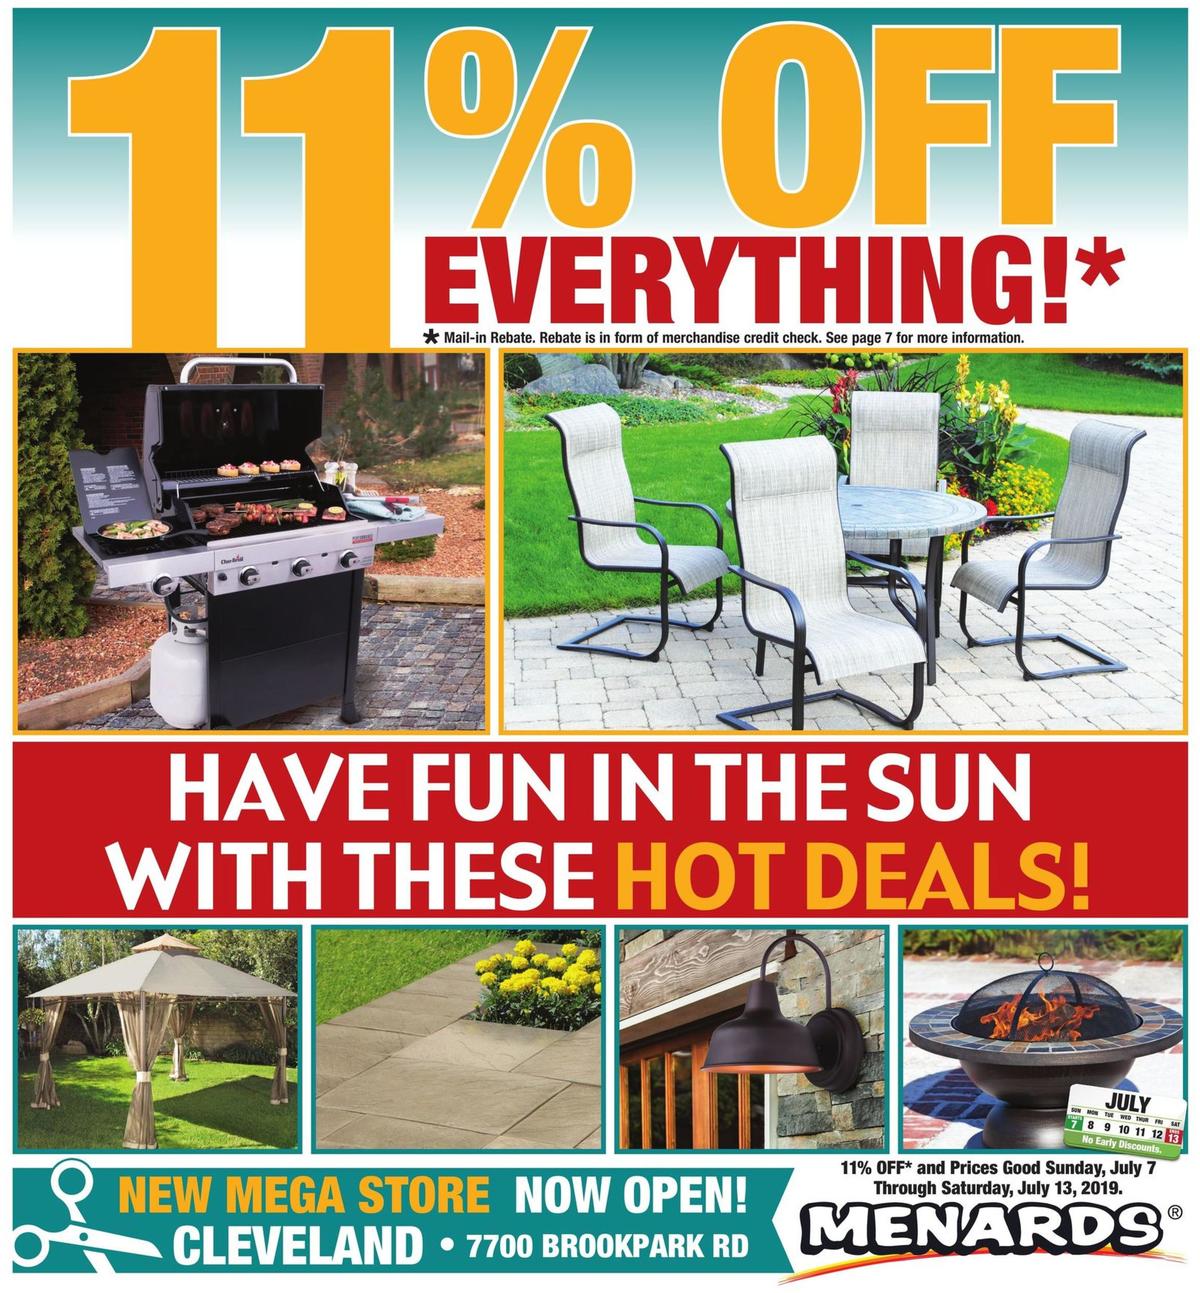 Menards Weekly Ads & Special Buys for July 7